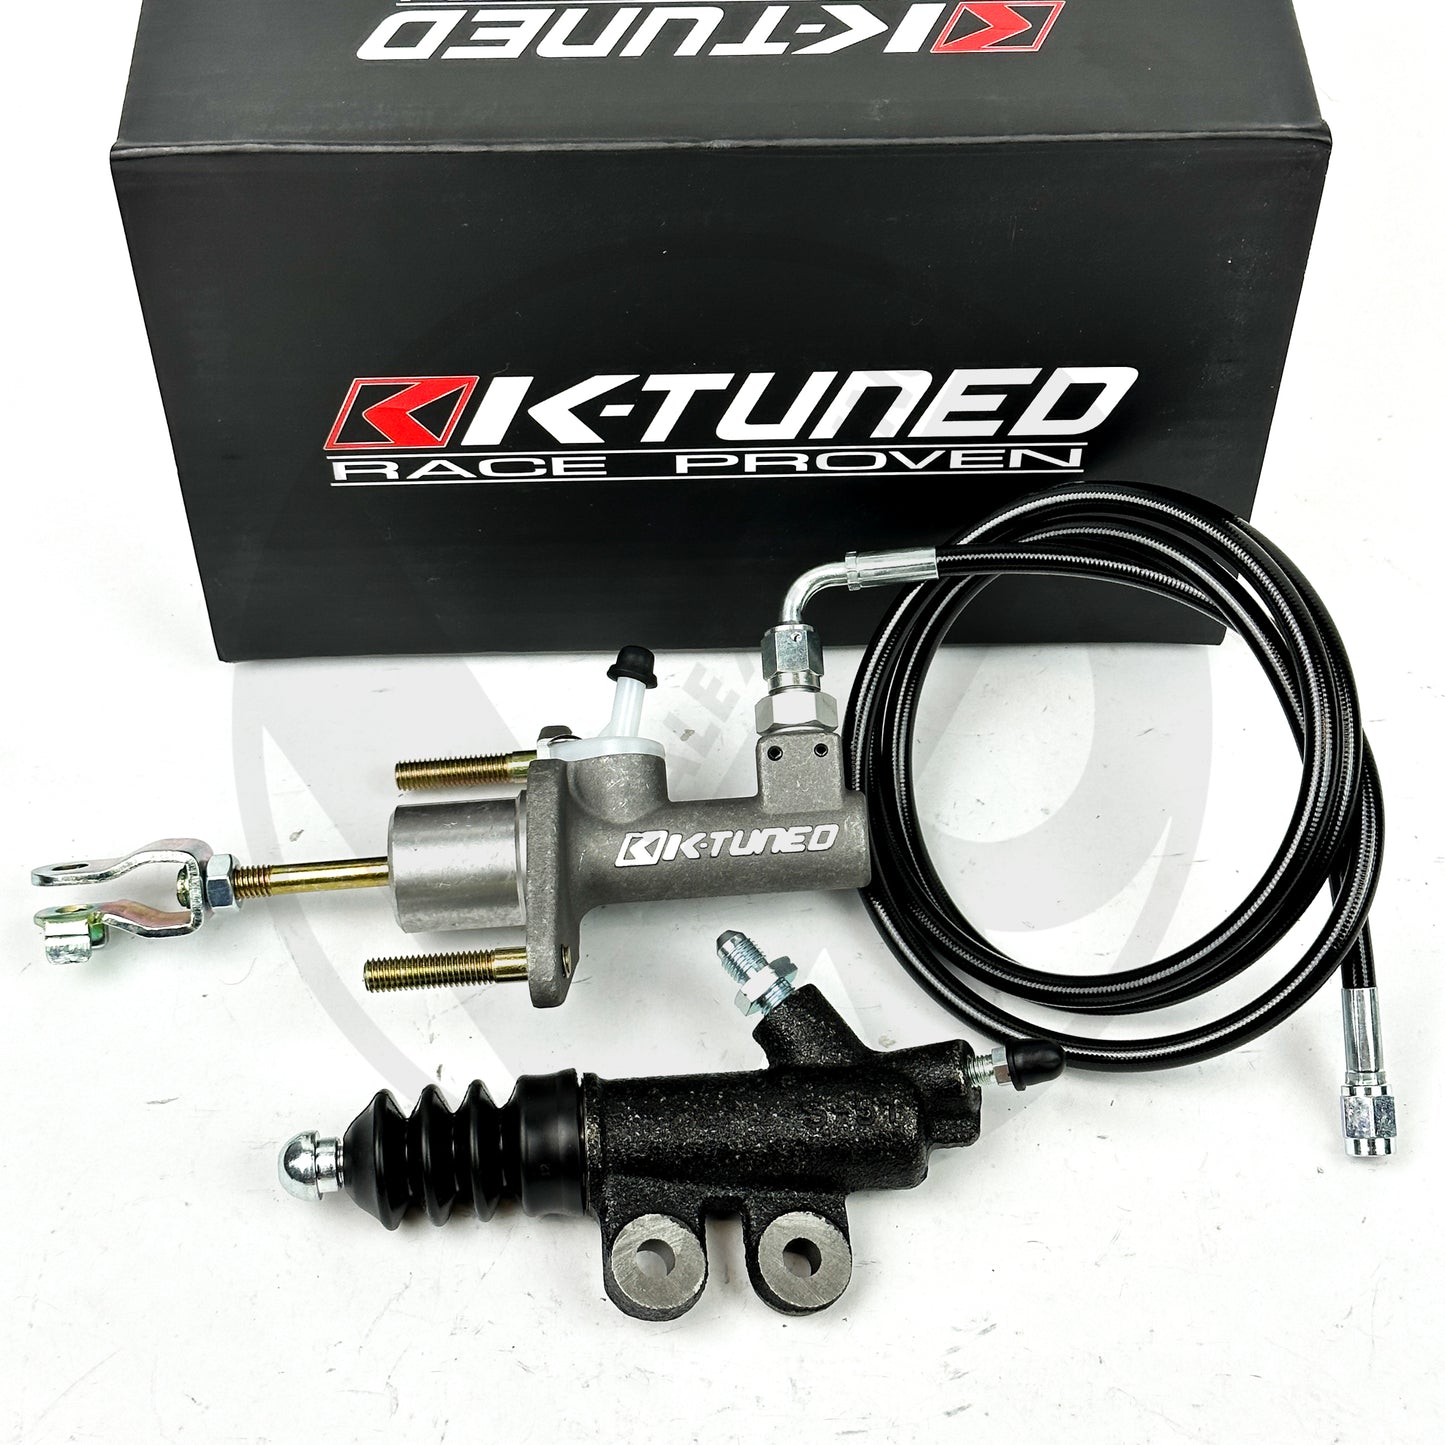 K-Tuned EM2 Clutch Master Exedy Slave Kit for 92-95 Honda Civic EG with Stainless Steel Clutch Line